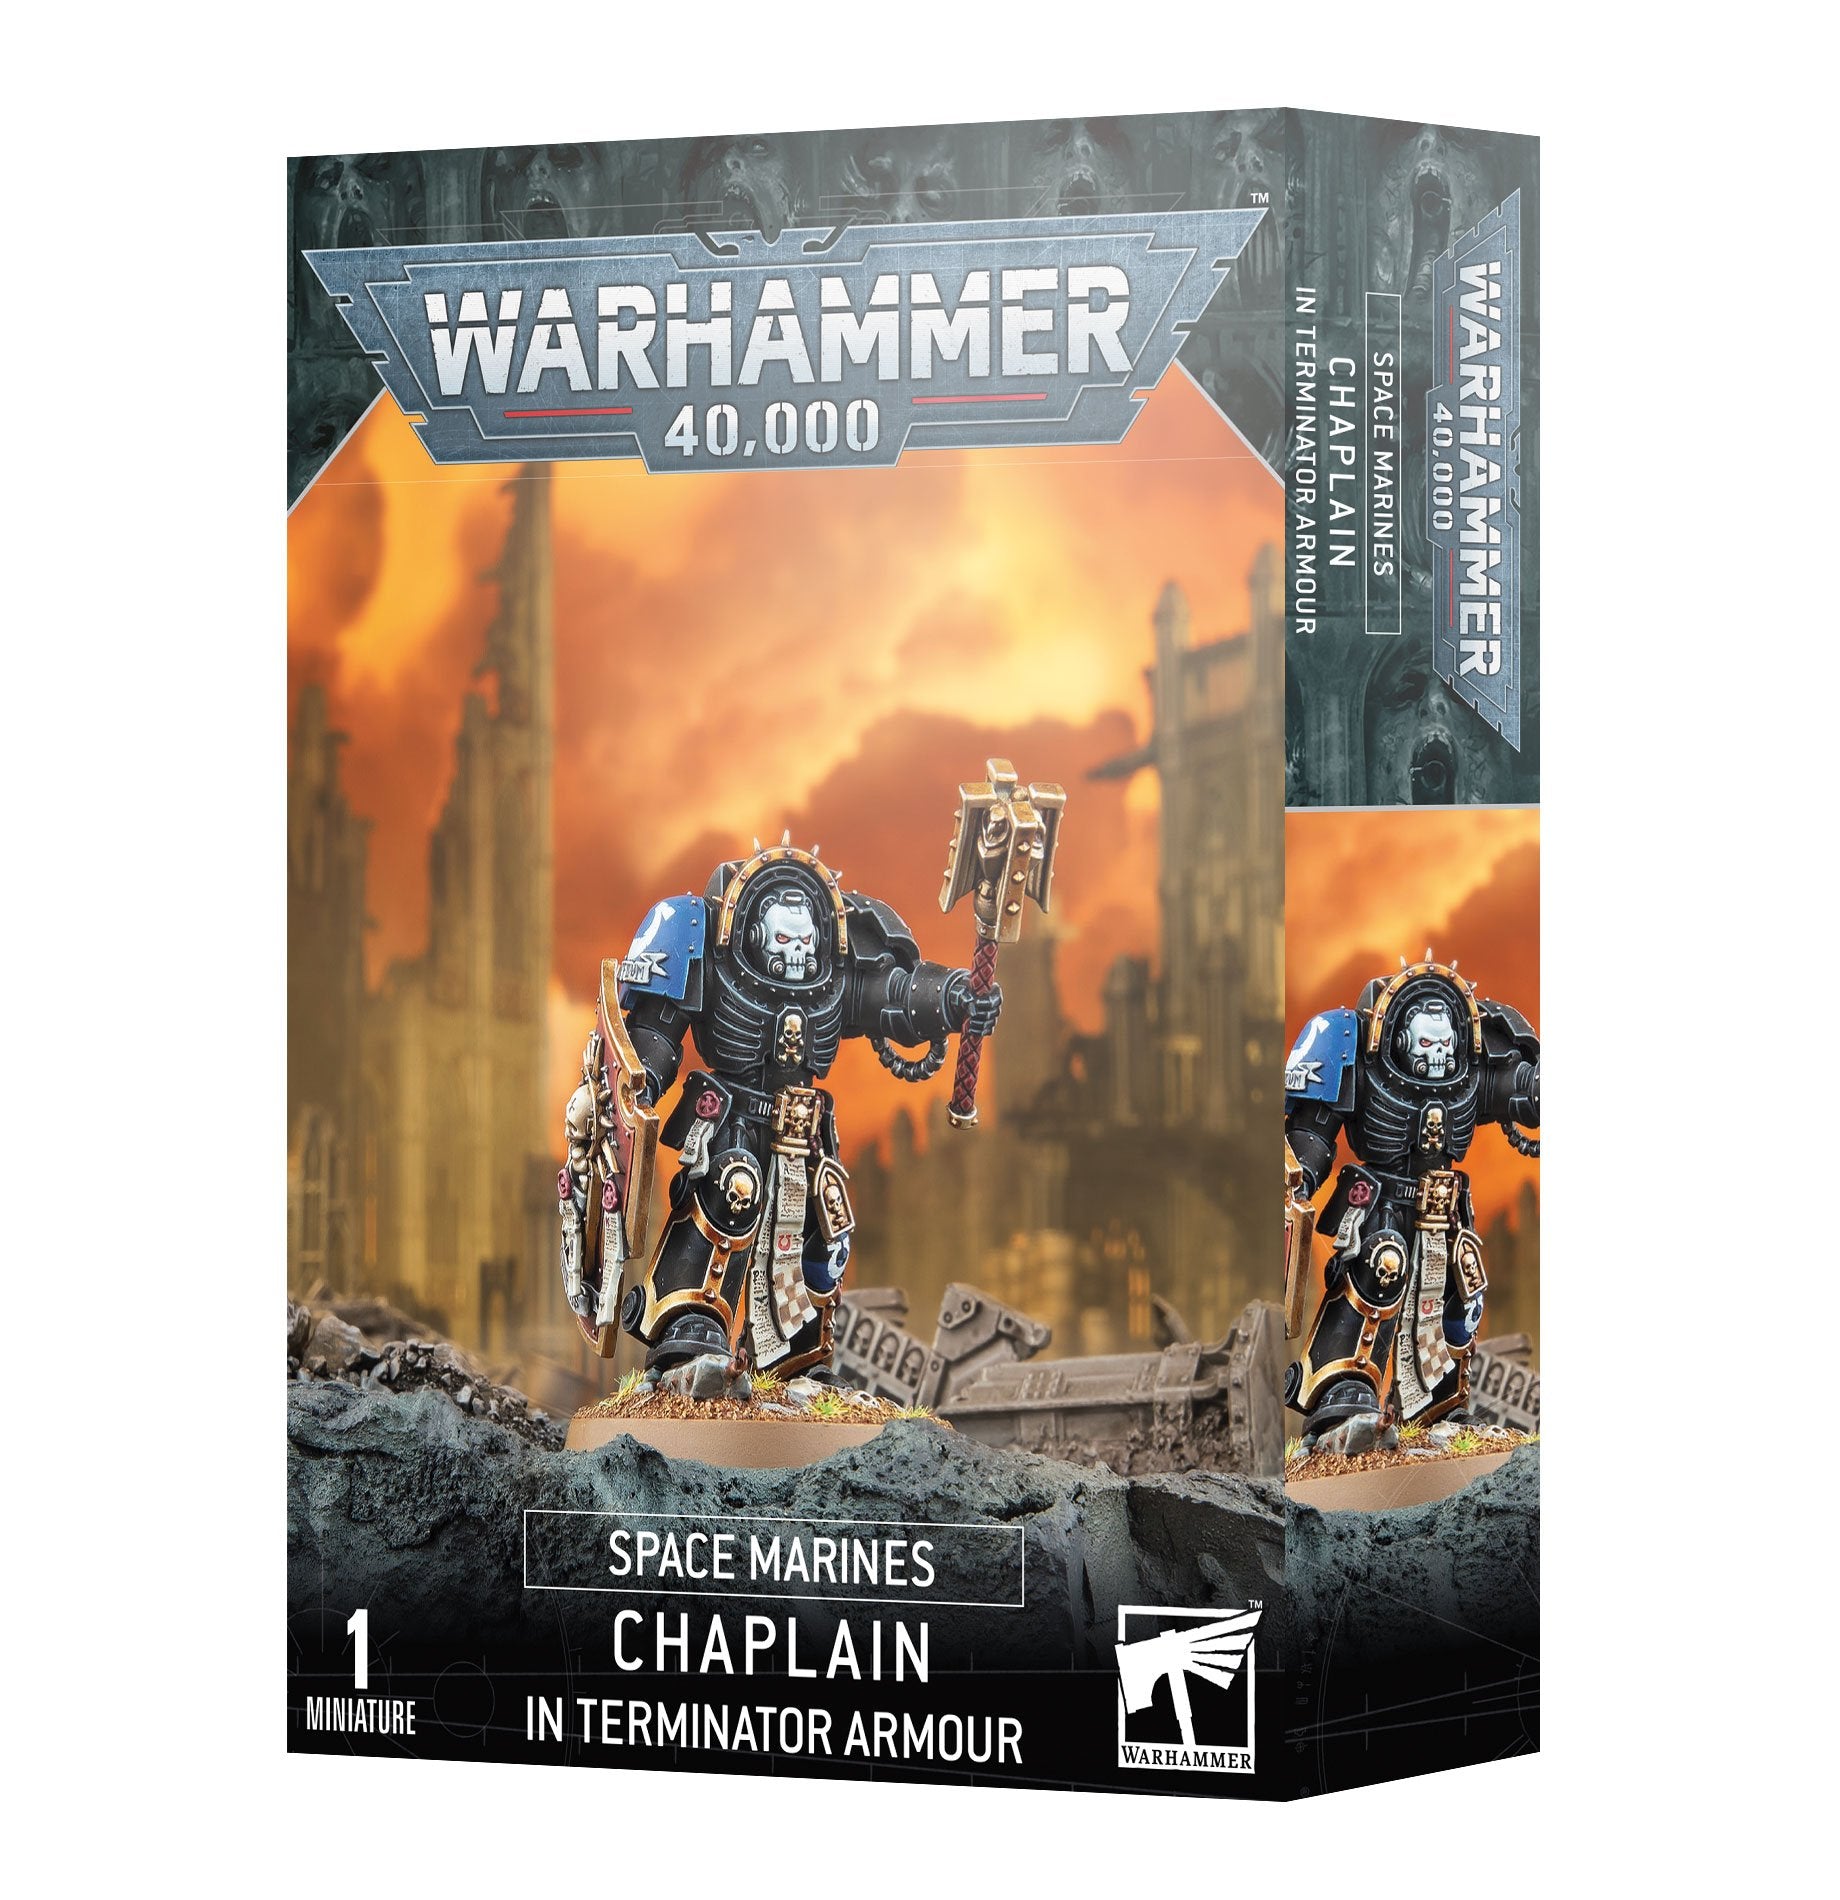 WH40K SPACE MARINES: CHAPLAIN IN TERMINATOR ARMOUR | Impulse Games and Hobbies